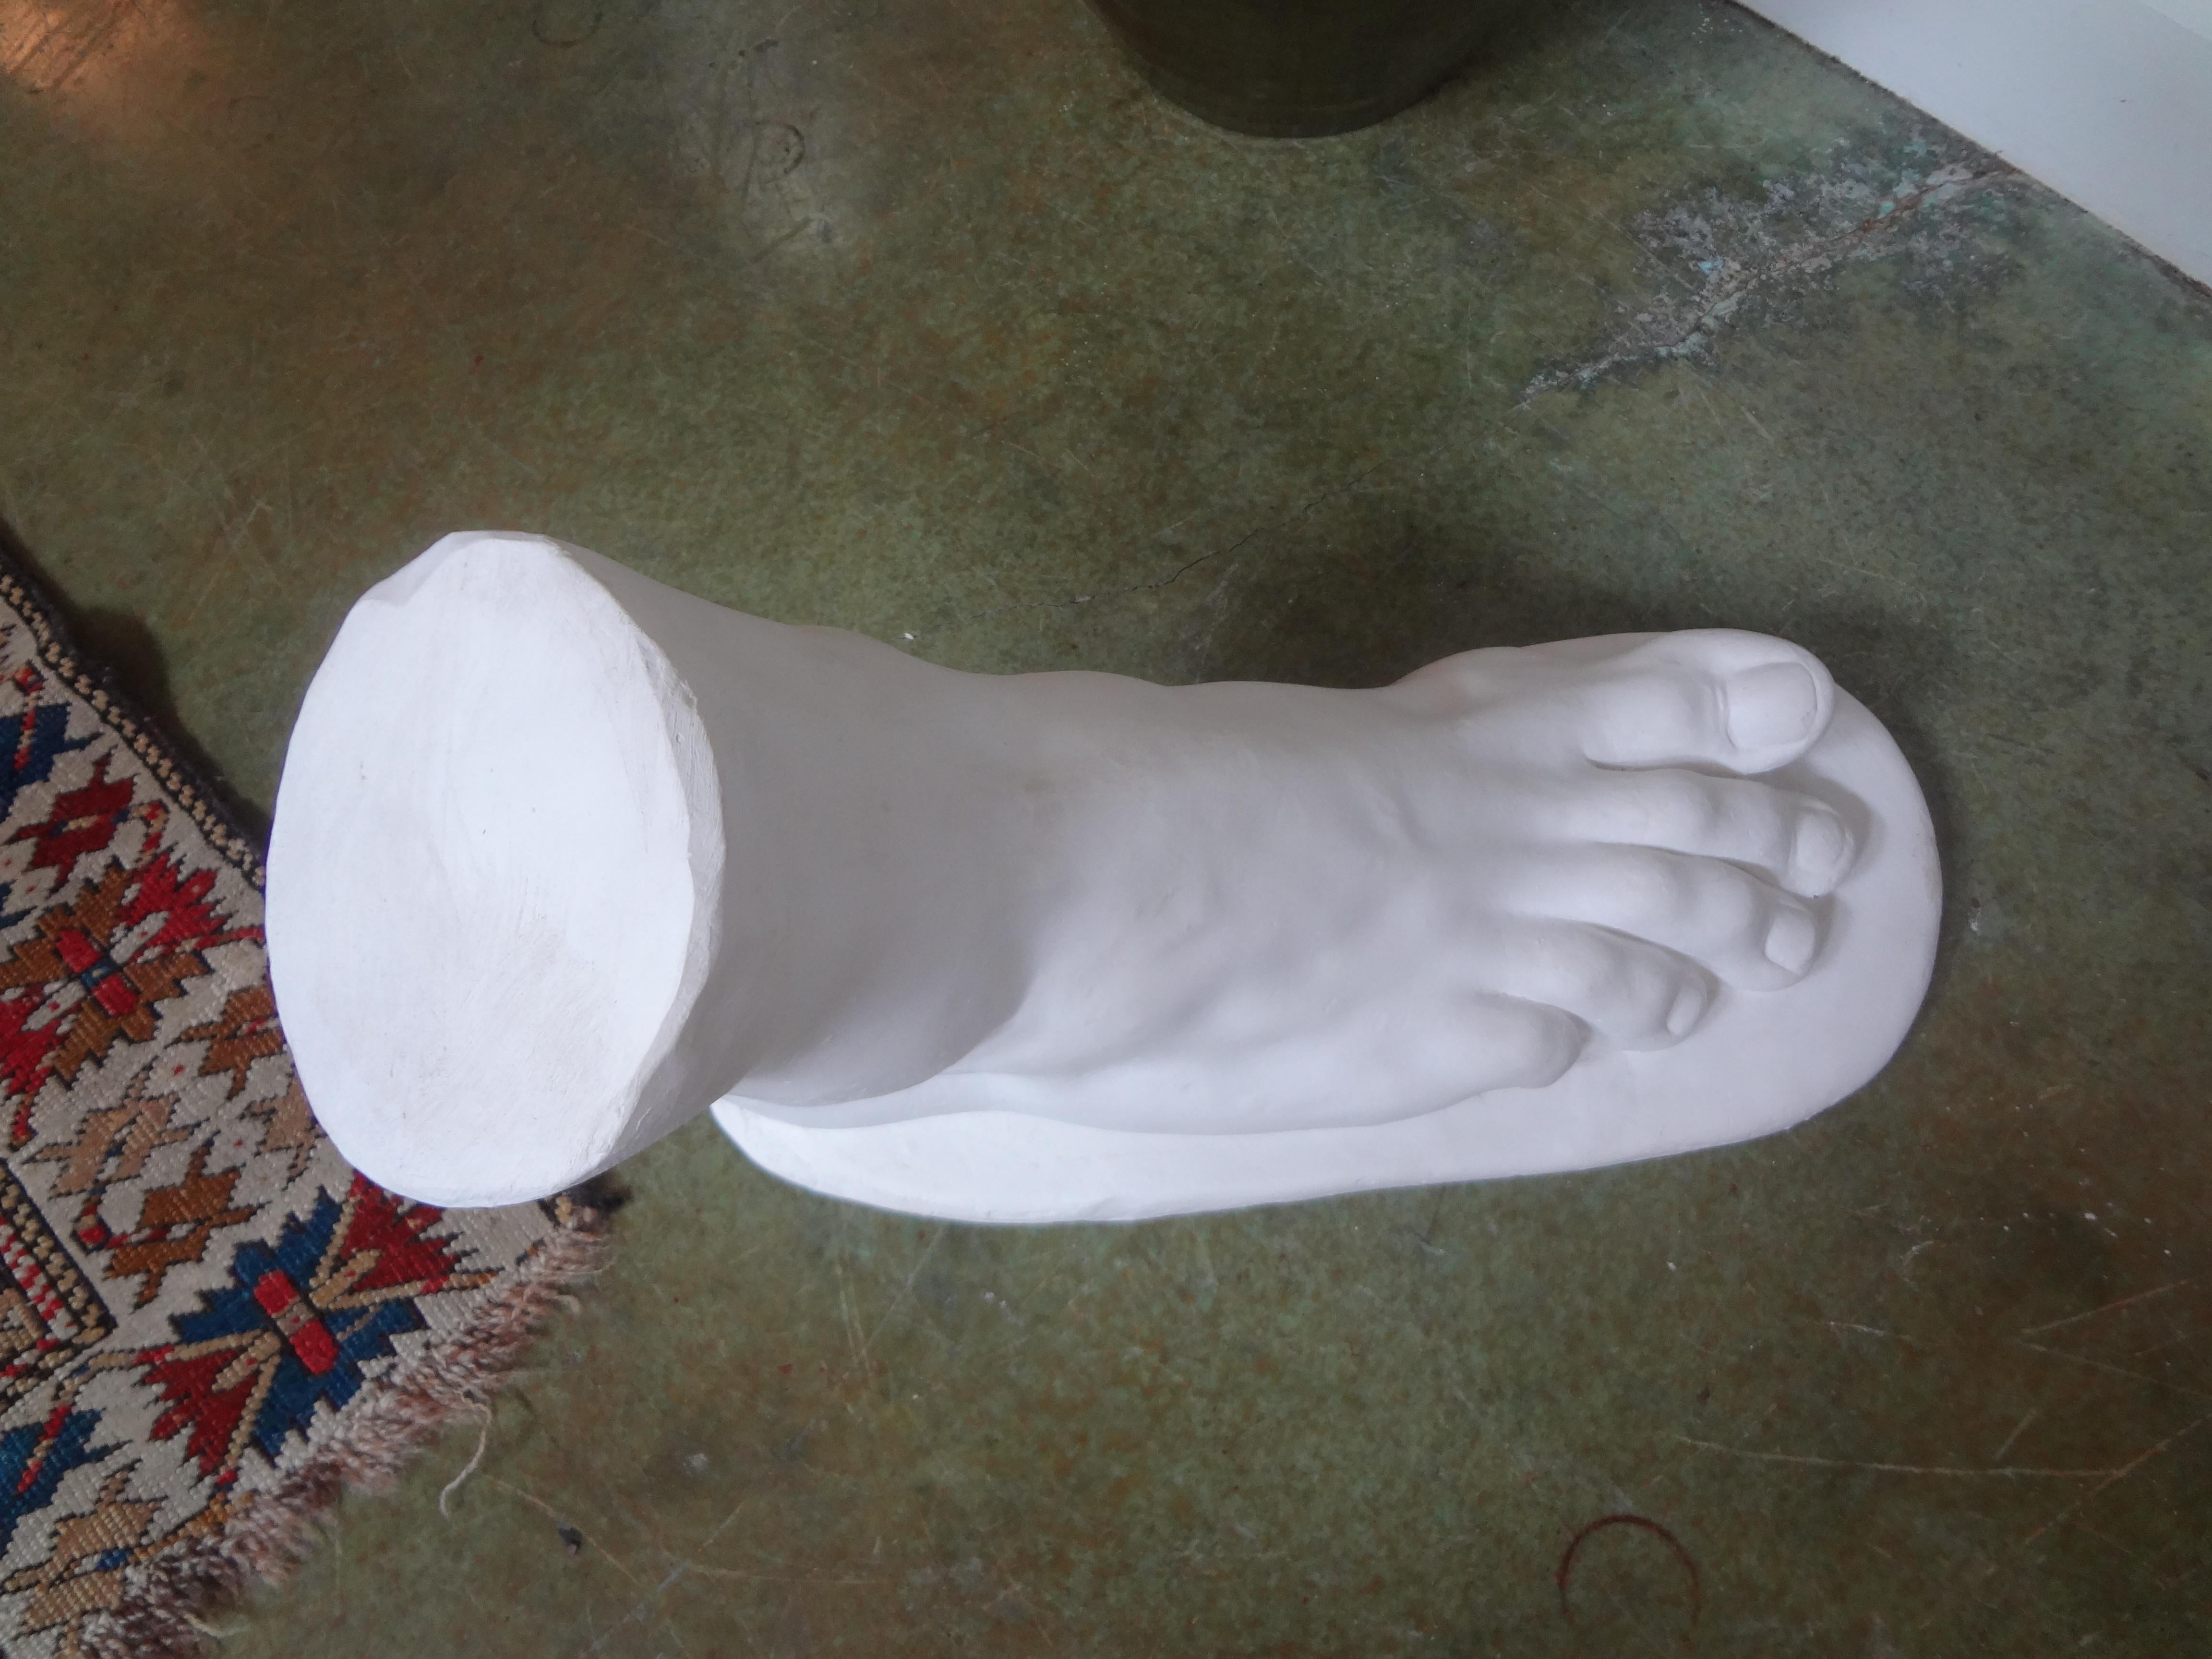 Unusually large and well detailed neoclassical Roman plaster foot sculpture of Hercules. This vintage Italian academic plaster foot sculpture would look excellent in a Contemporary, Mid Century, Hollywood Regency, Post Modern or Neoclassical